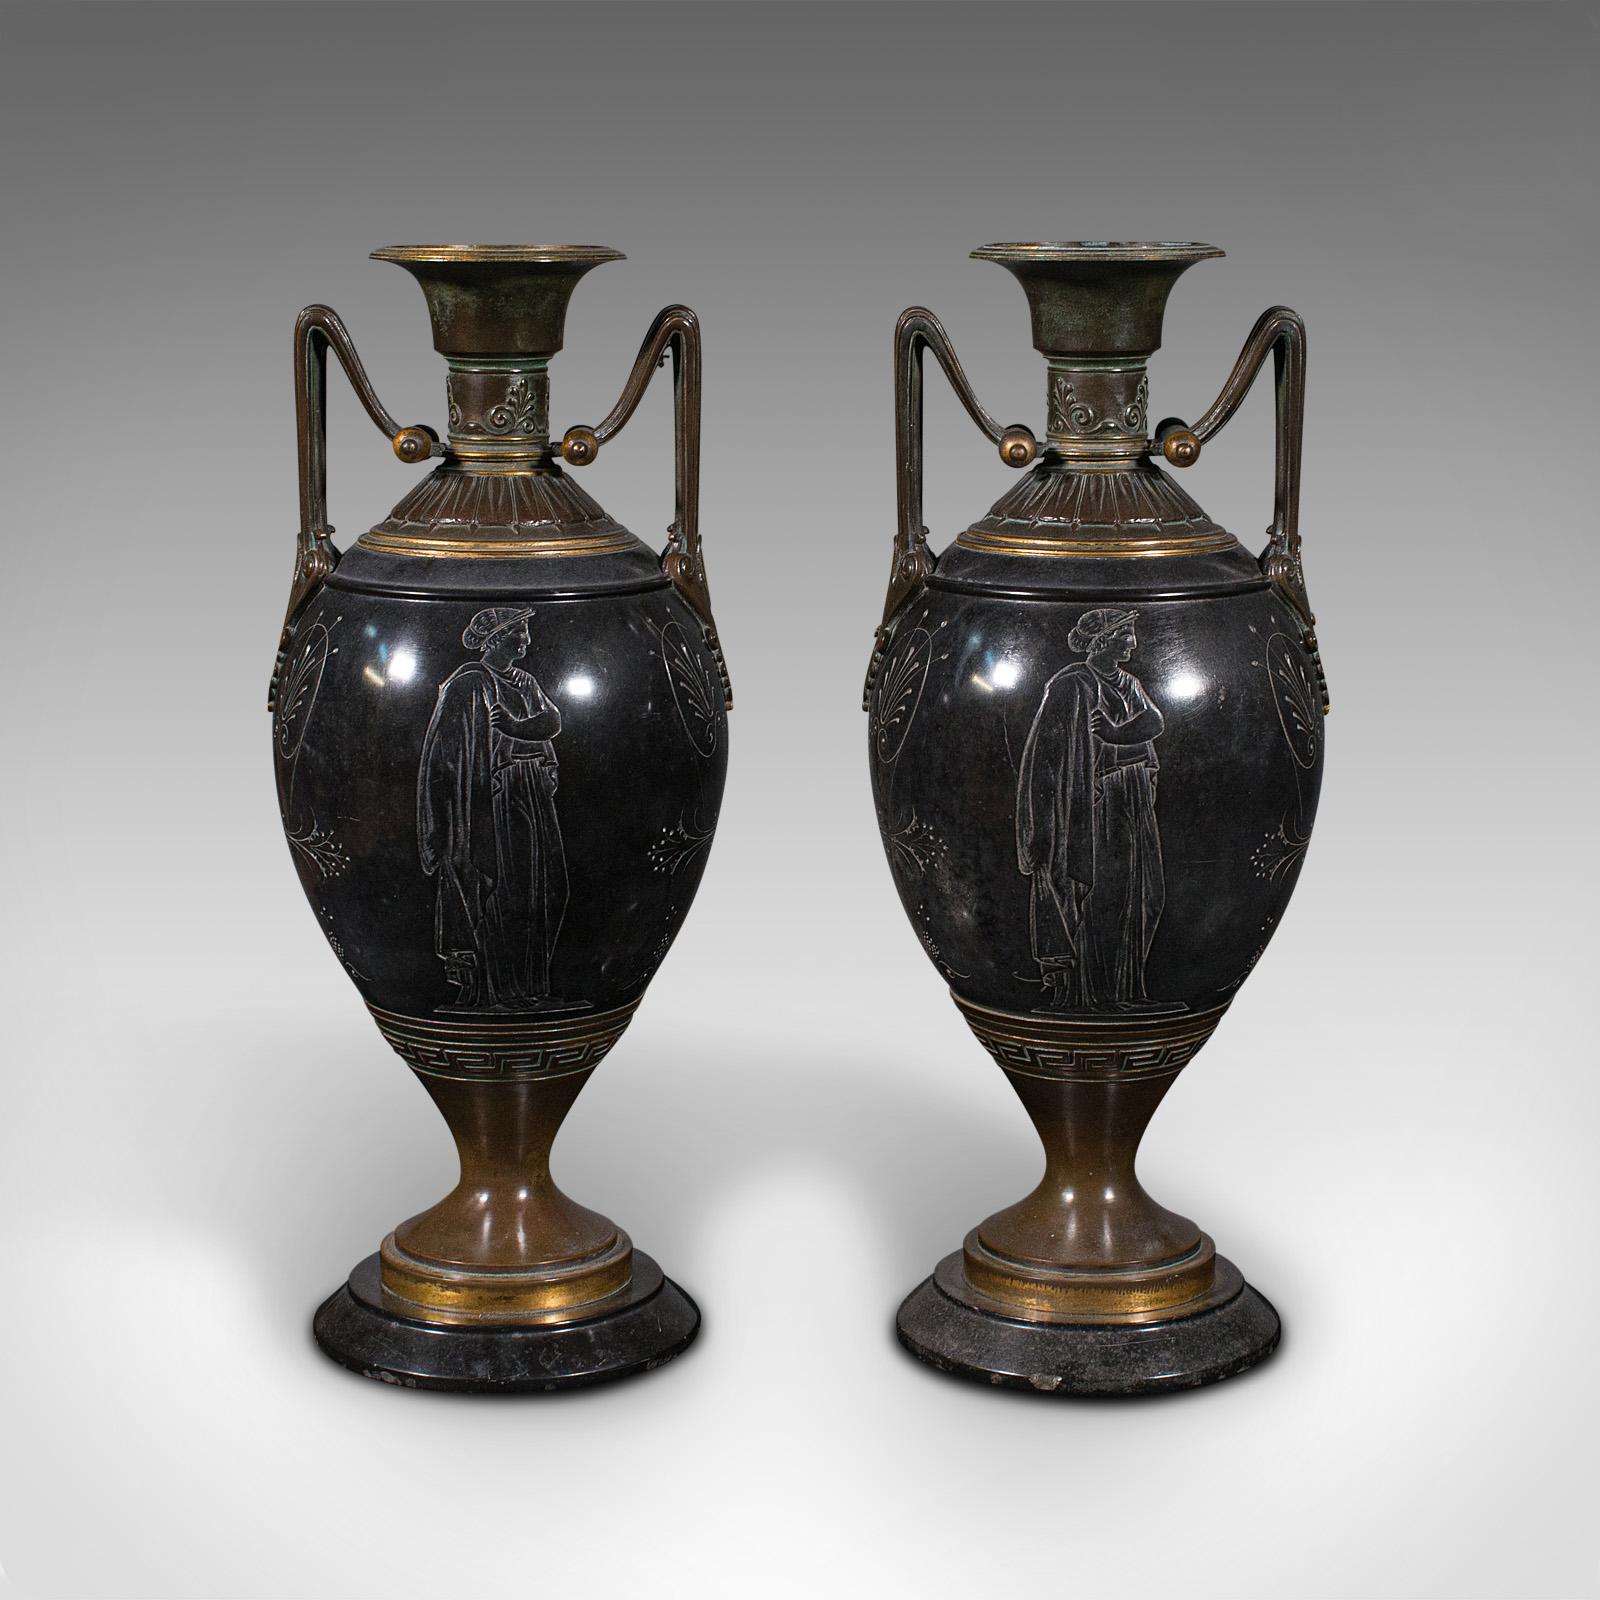 This is a pair of antique display vases. An Italian, heavy marble and bronze decorative urn, dating to the Grand Tour period, circa 1870.

A superior pair of elegant grand tour vases
Displaying a desirable aged patina and in good